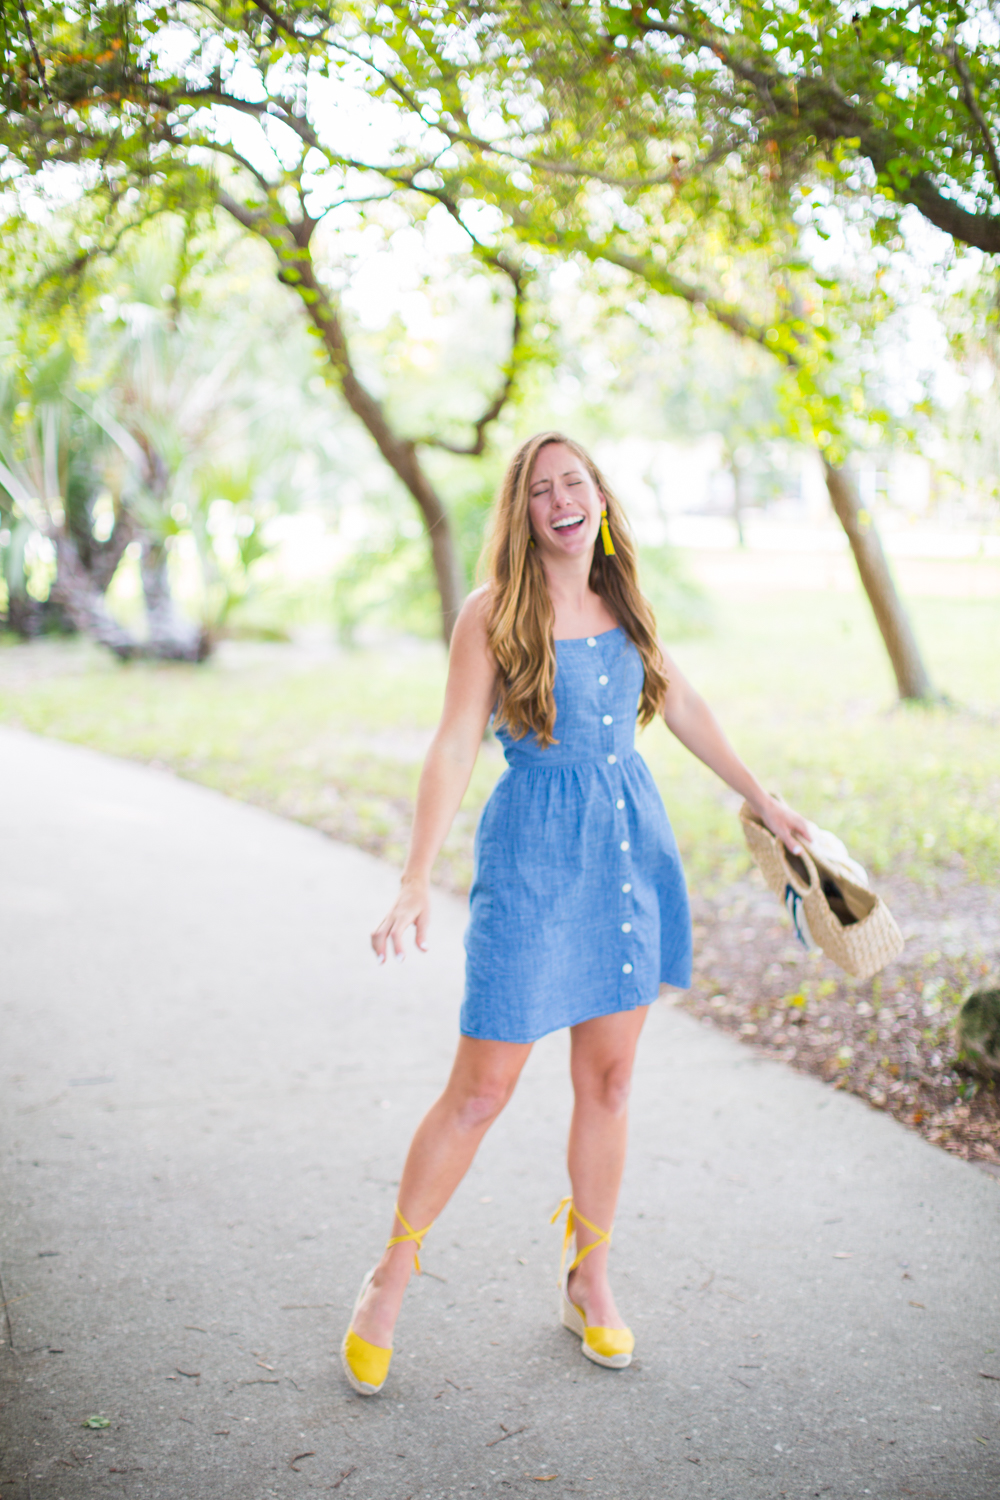 Affordable Chambray Button Up Dresses for Summer, J.Crew Button Up Dress - Sunshine Style, A Florida Fashion Blog